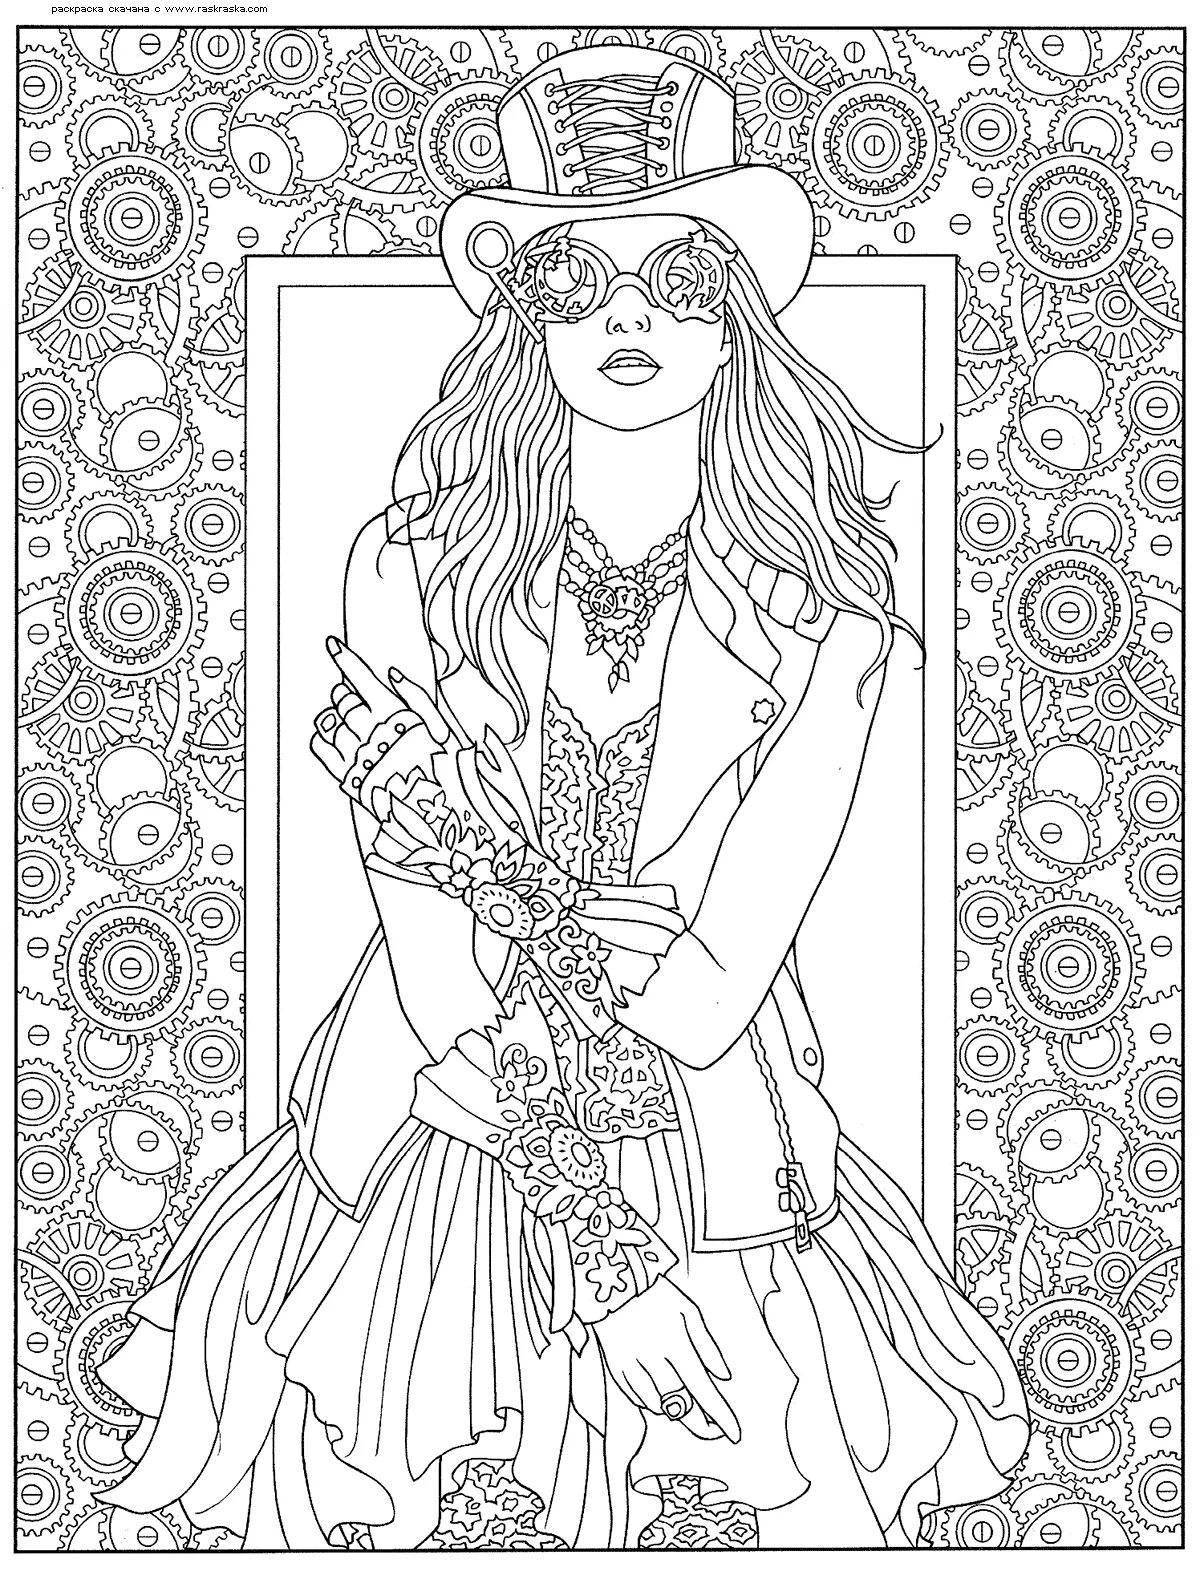 Adorable coloring book for adult girls